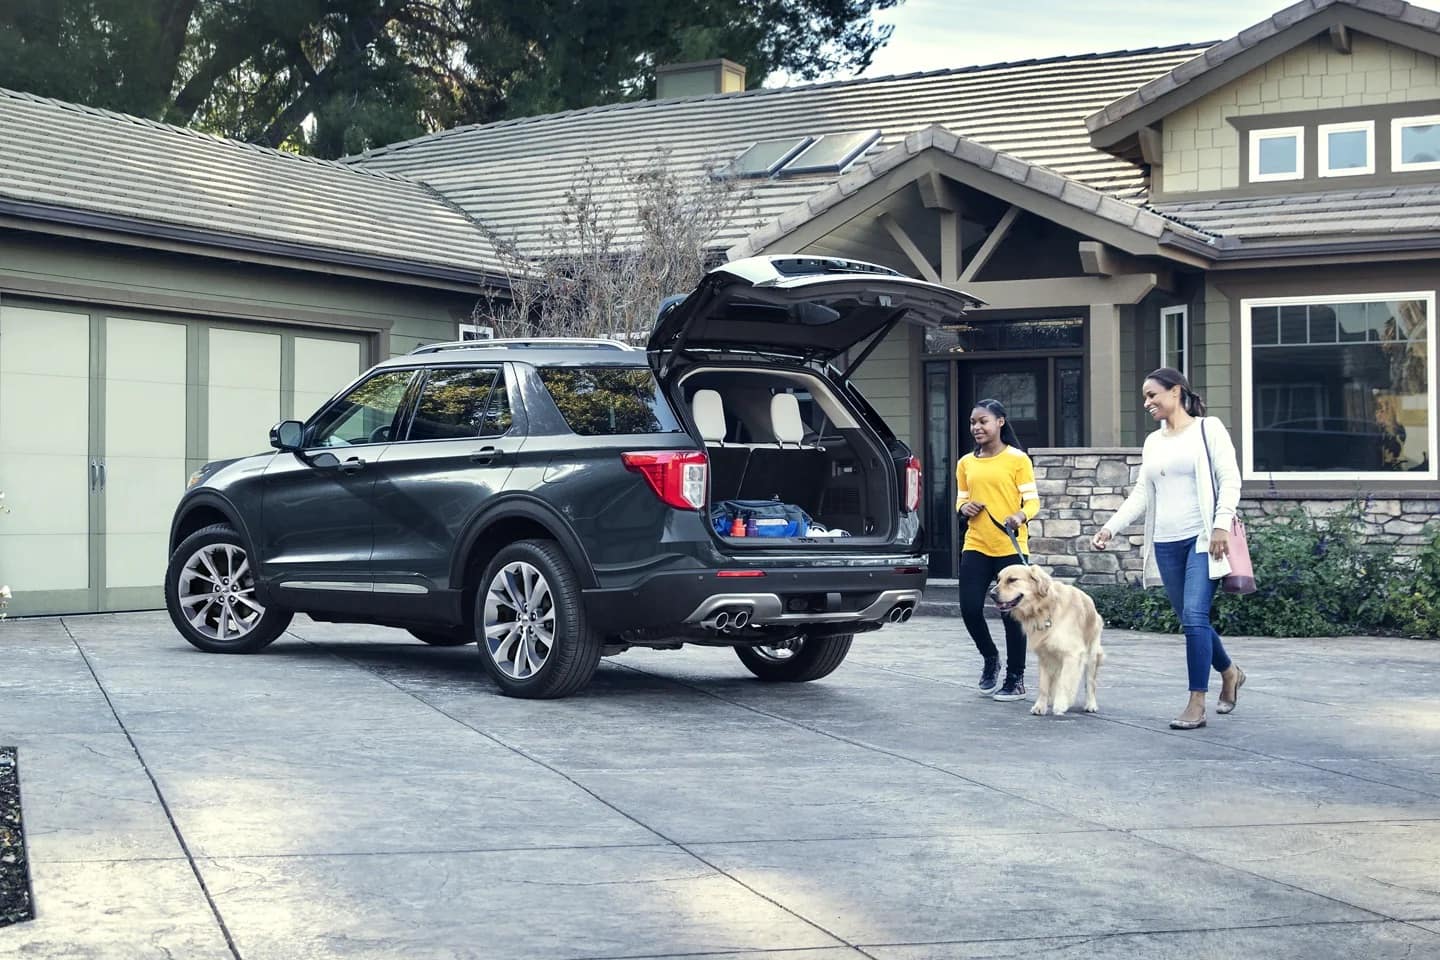 2022 Ford Explorer in driveway with girl, dog, and adult women 